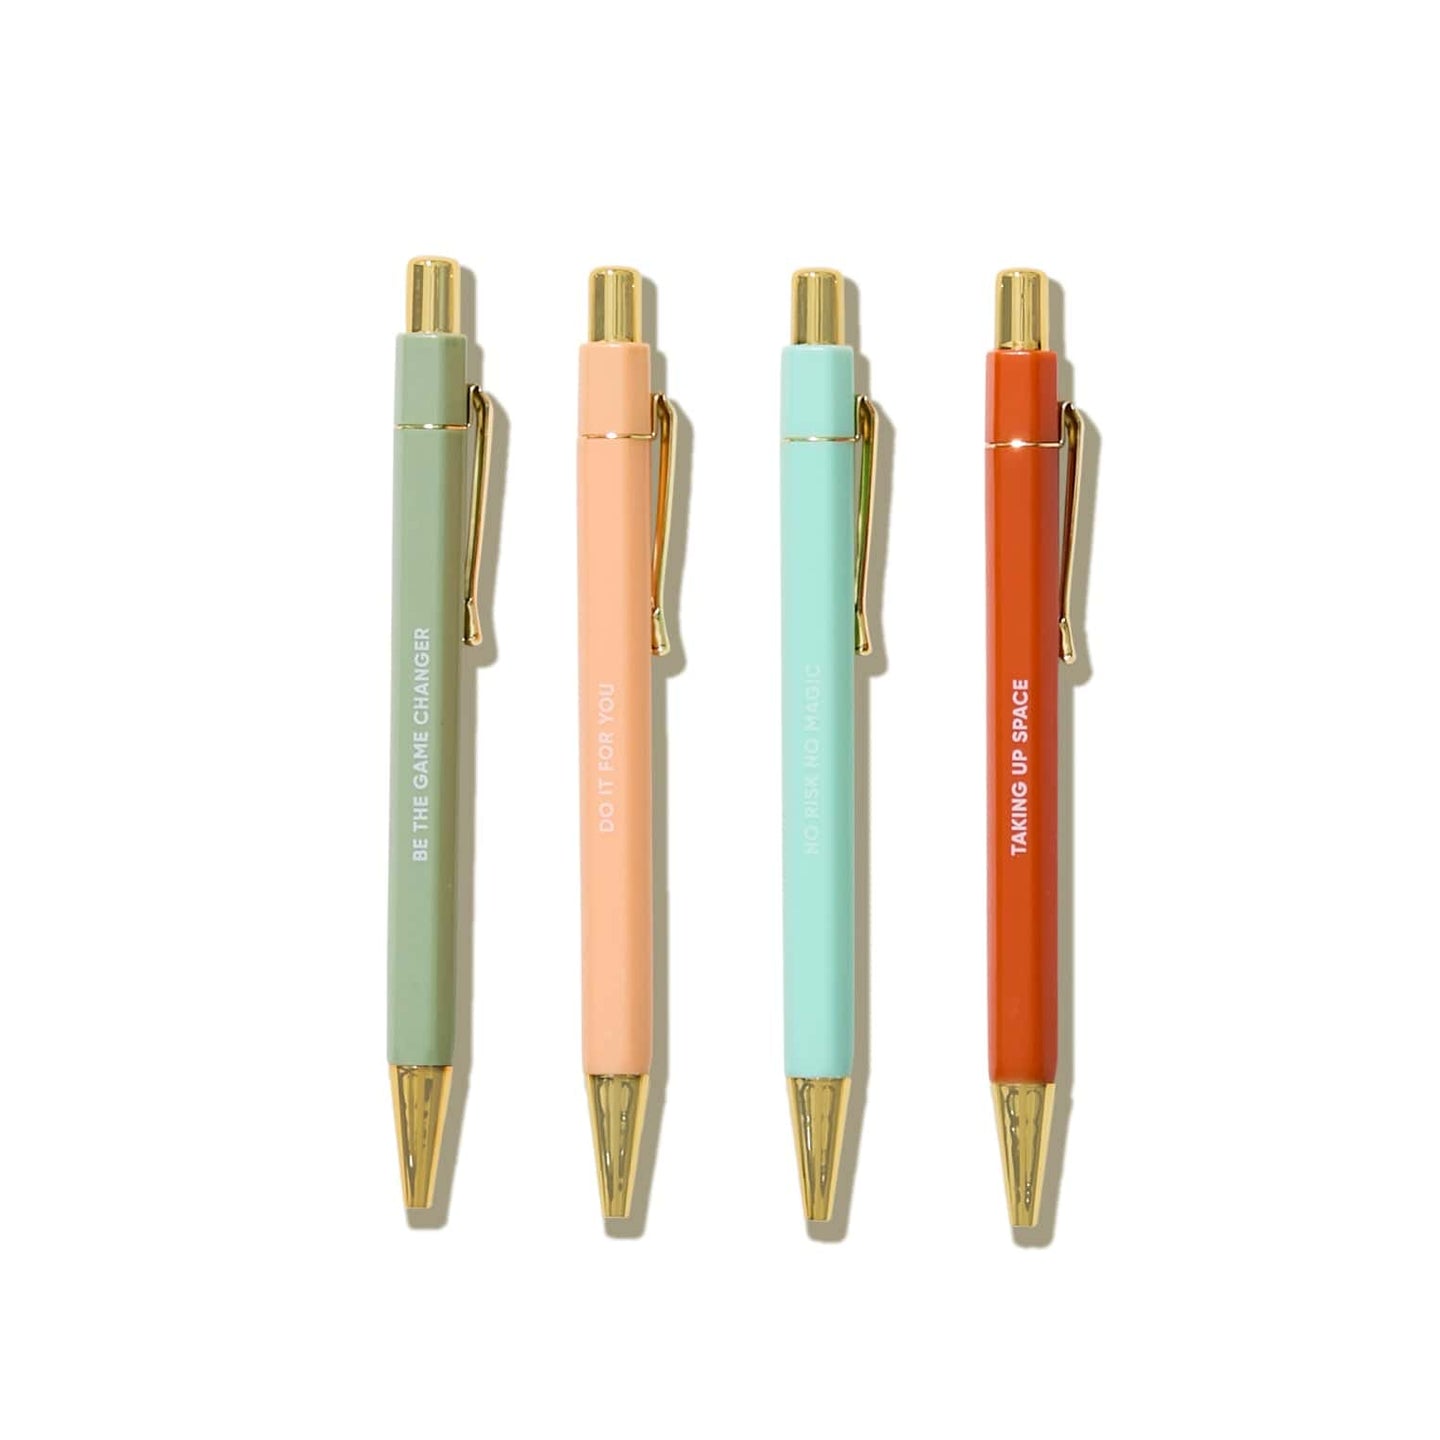 4 ct noteworthy affirmation pens